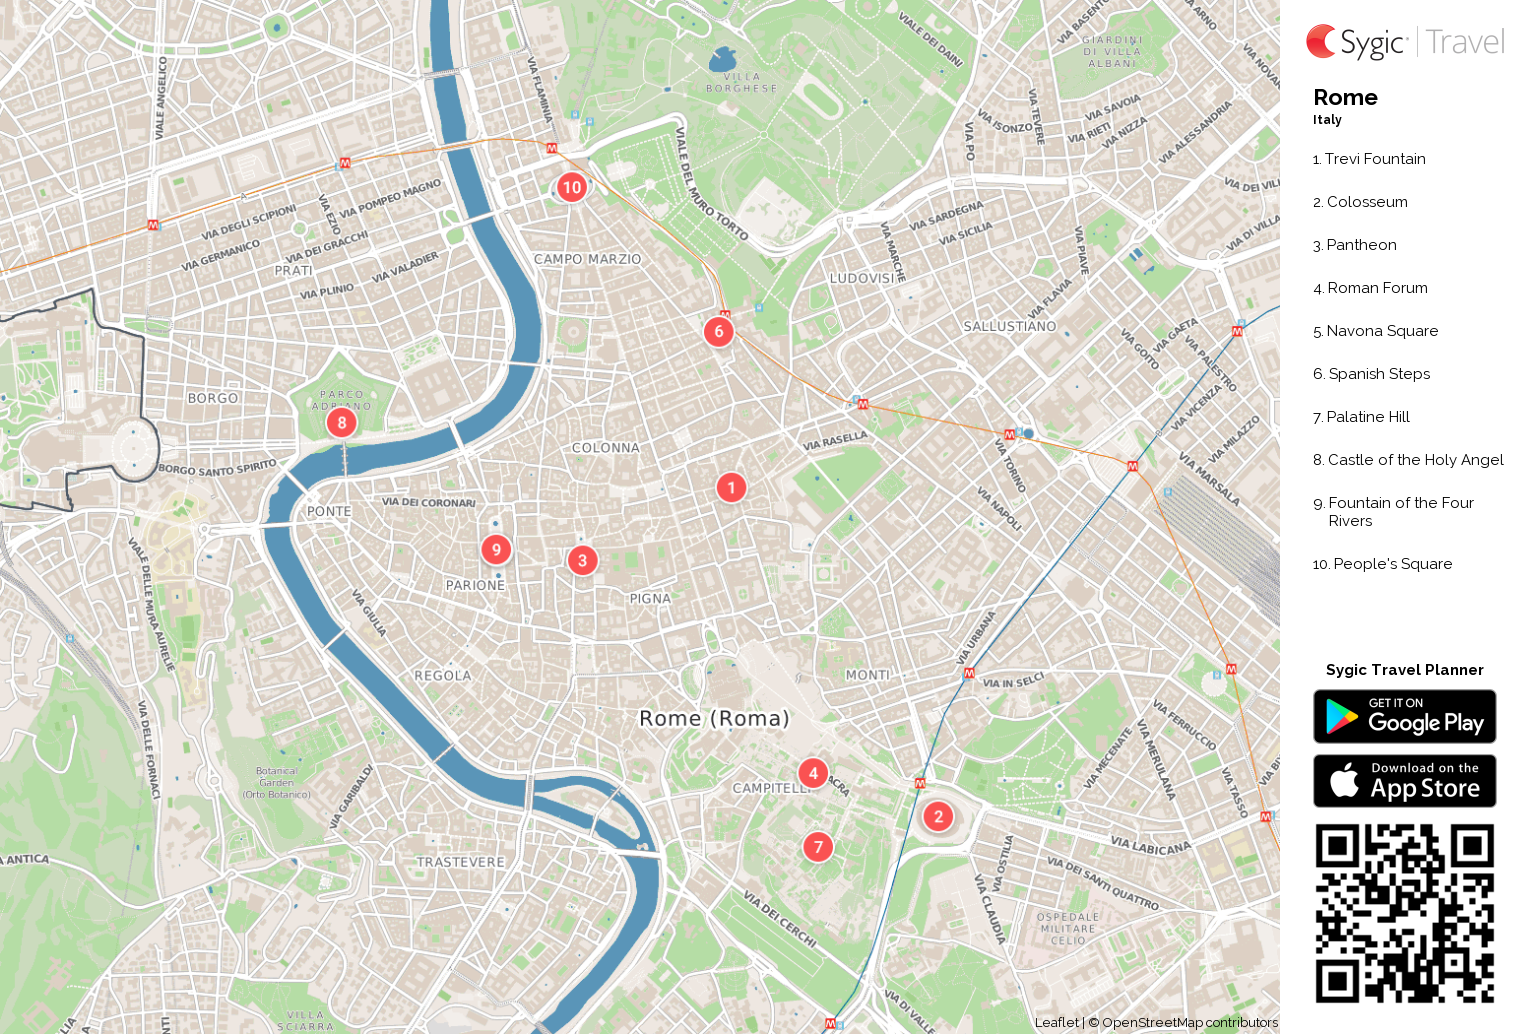 maps of rome showing attractions